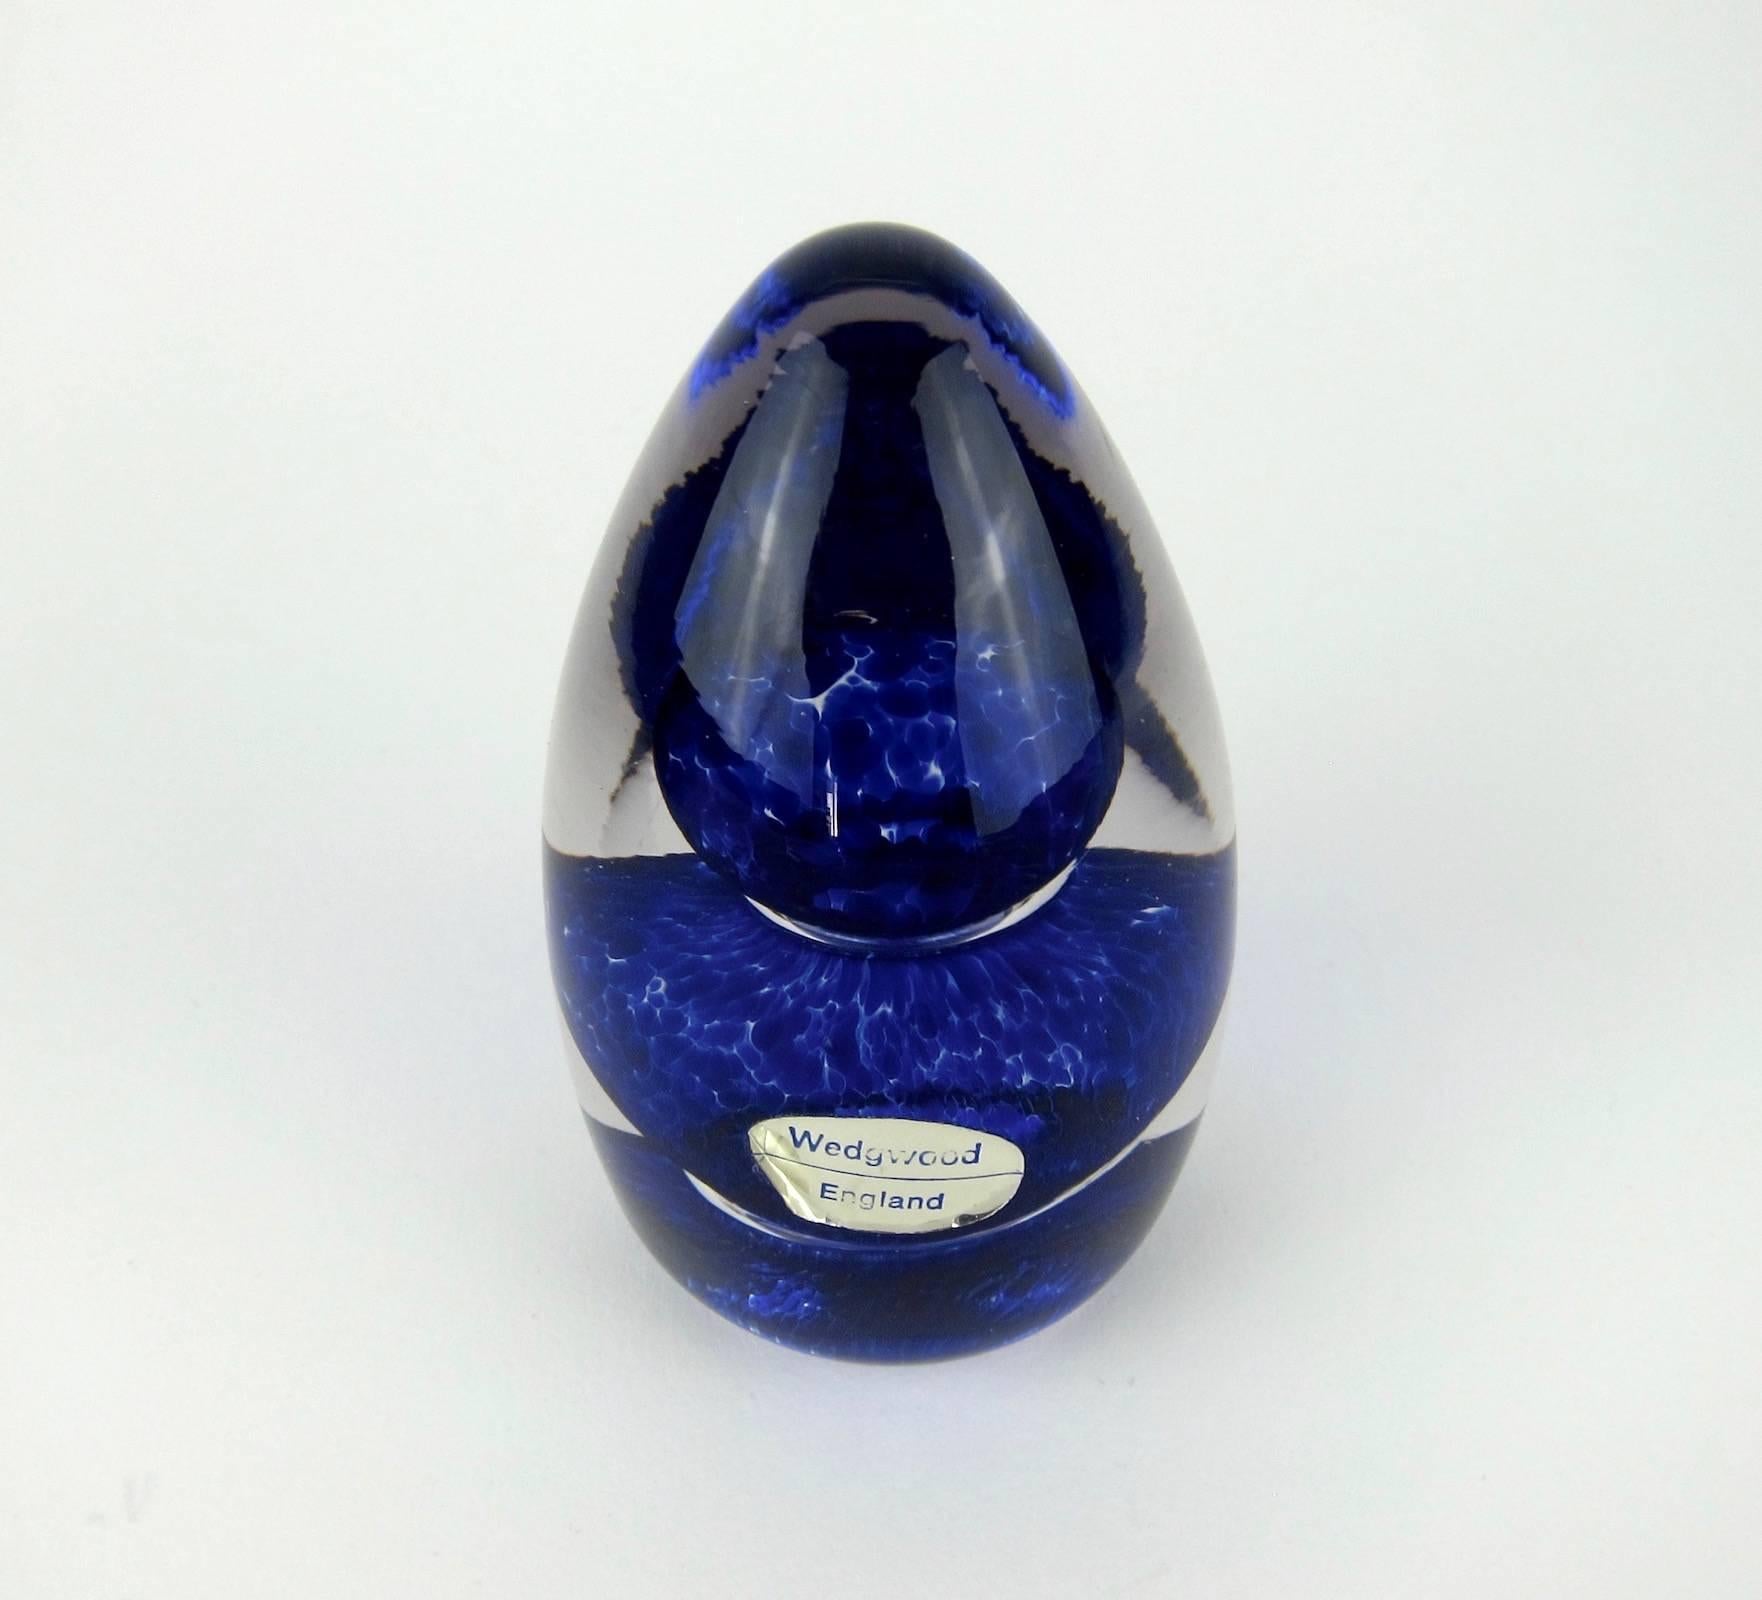 wedgwood glass paperweight